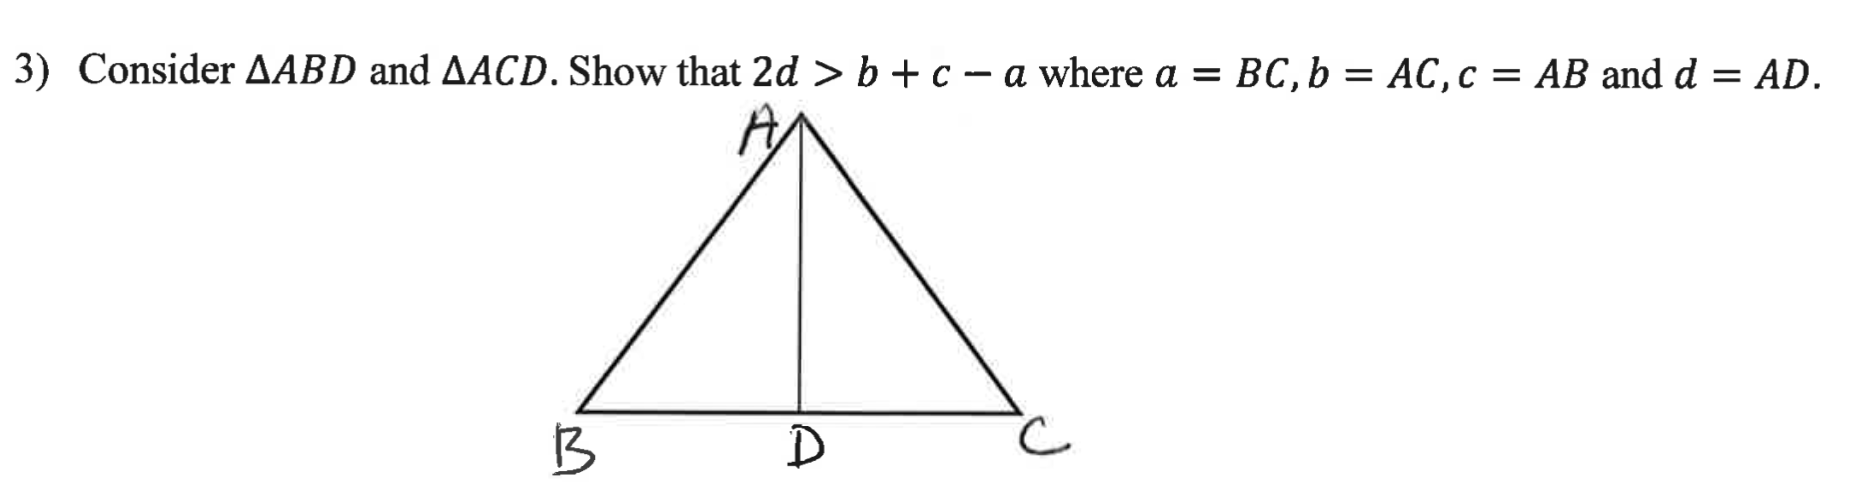 3) Consider AABD and AACD. Show that 2d > b + c – a where a = BC,b = AC,c = AB and d = AD.
